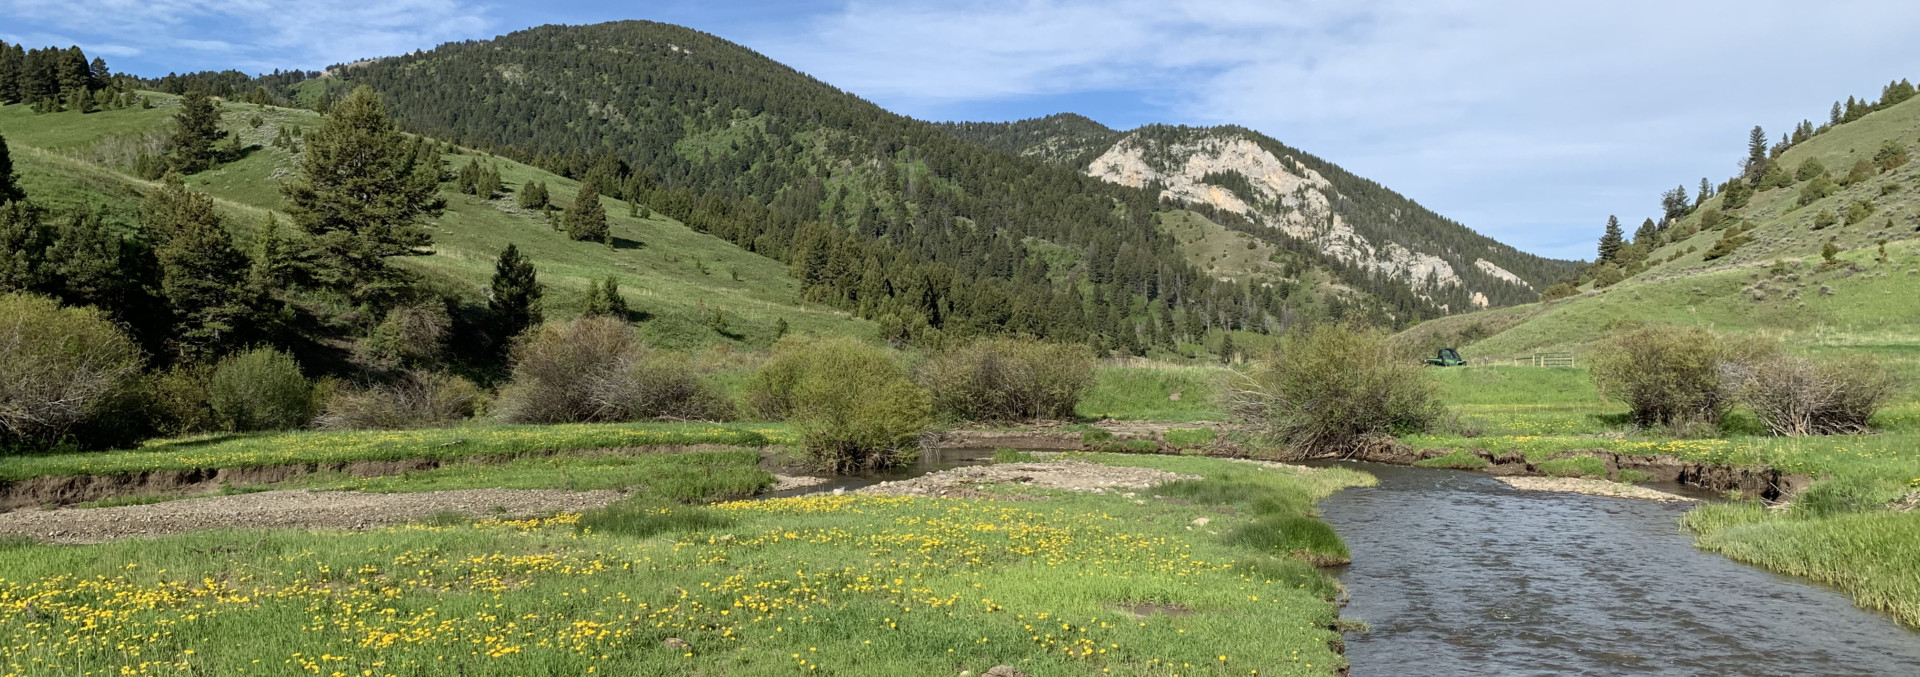 montana hunting land for sale middle fork of sixteen mile creek ranch